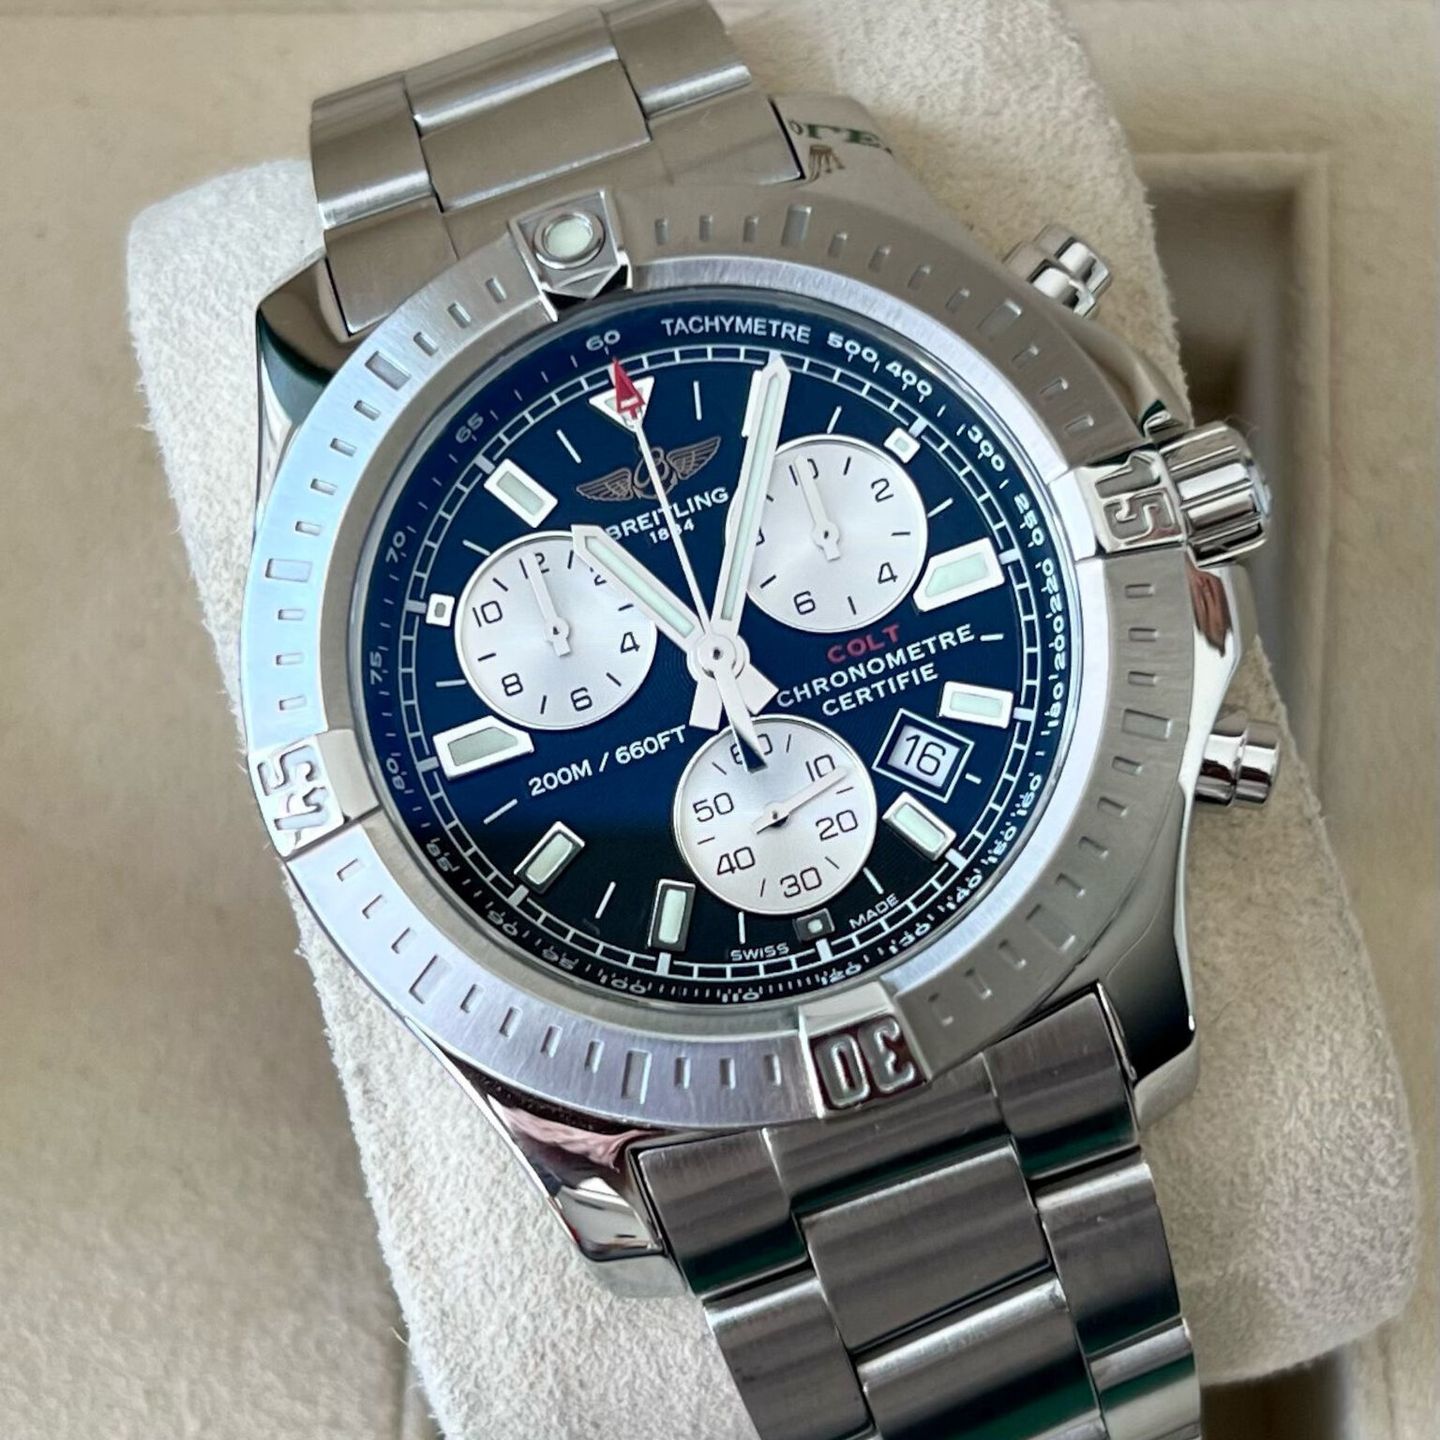 Breitling Colt Chronograph A73388 (2016) - Blauw wijzerplaat 44mm Staal (1/5)